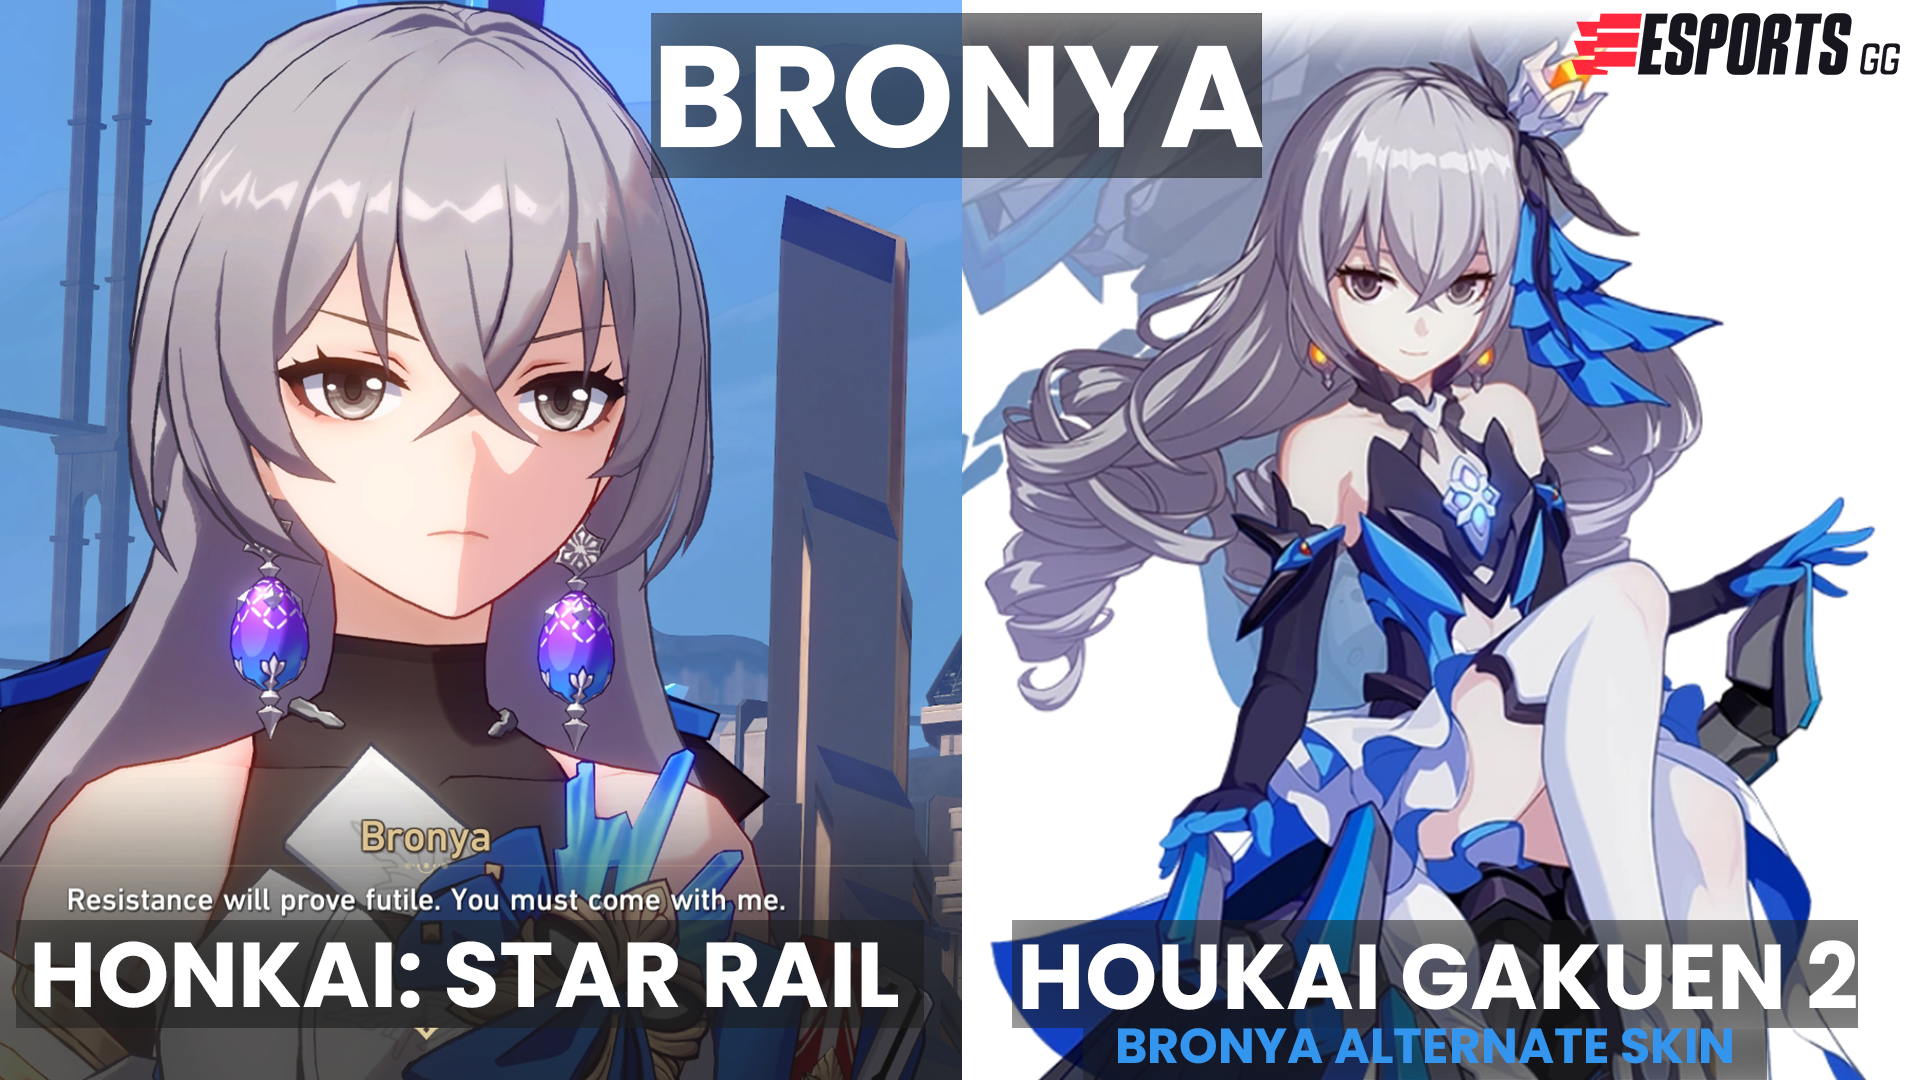 How to get a free 5-star character in Honkai Star Rail